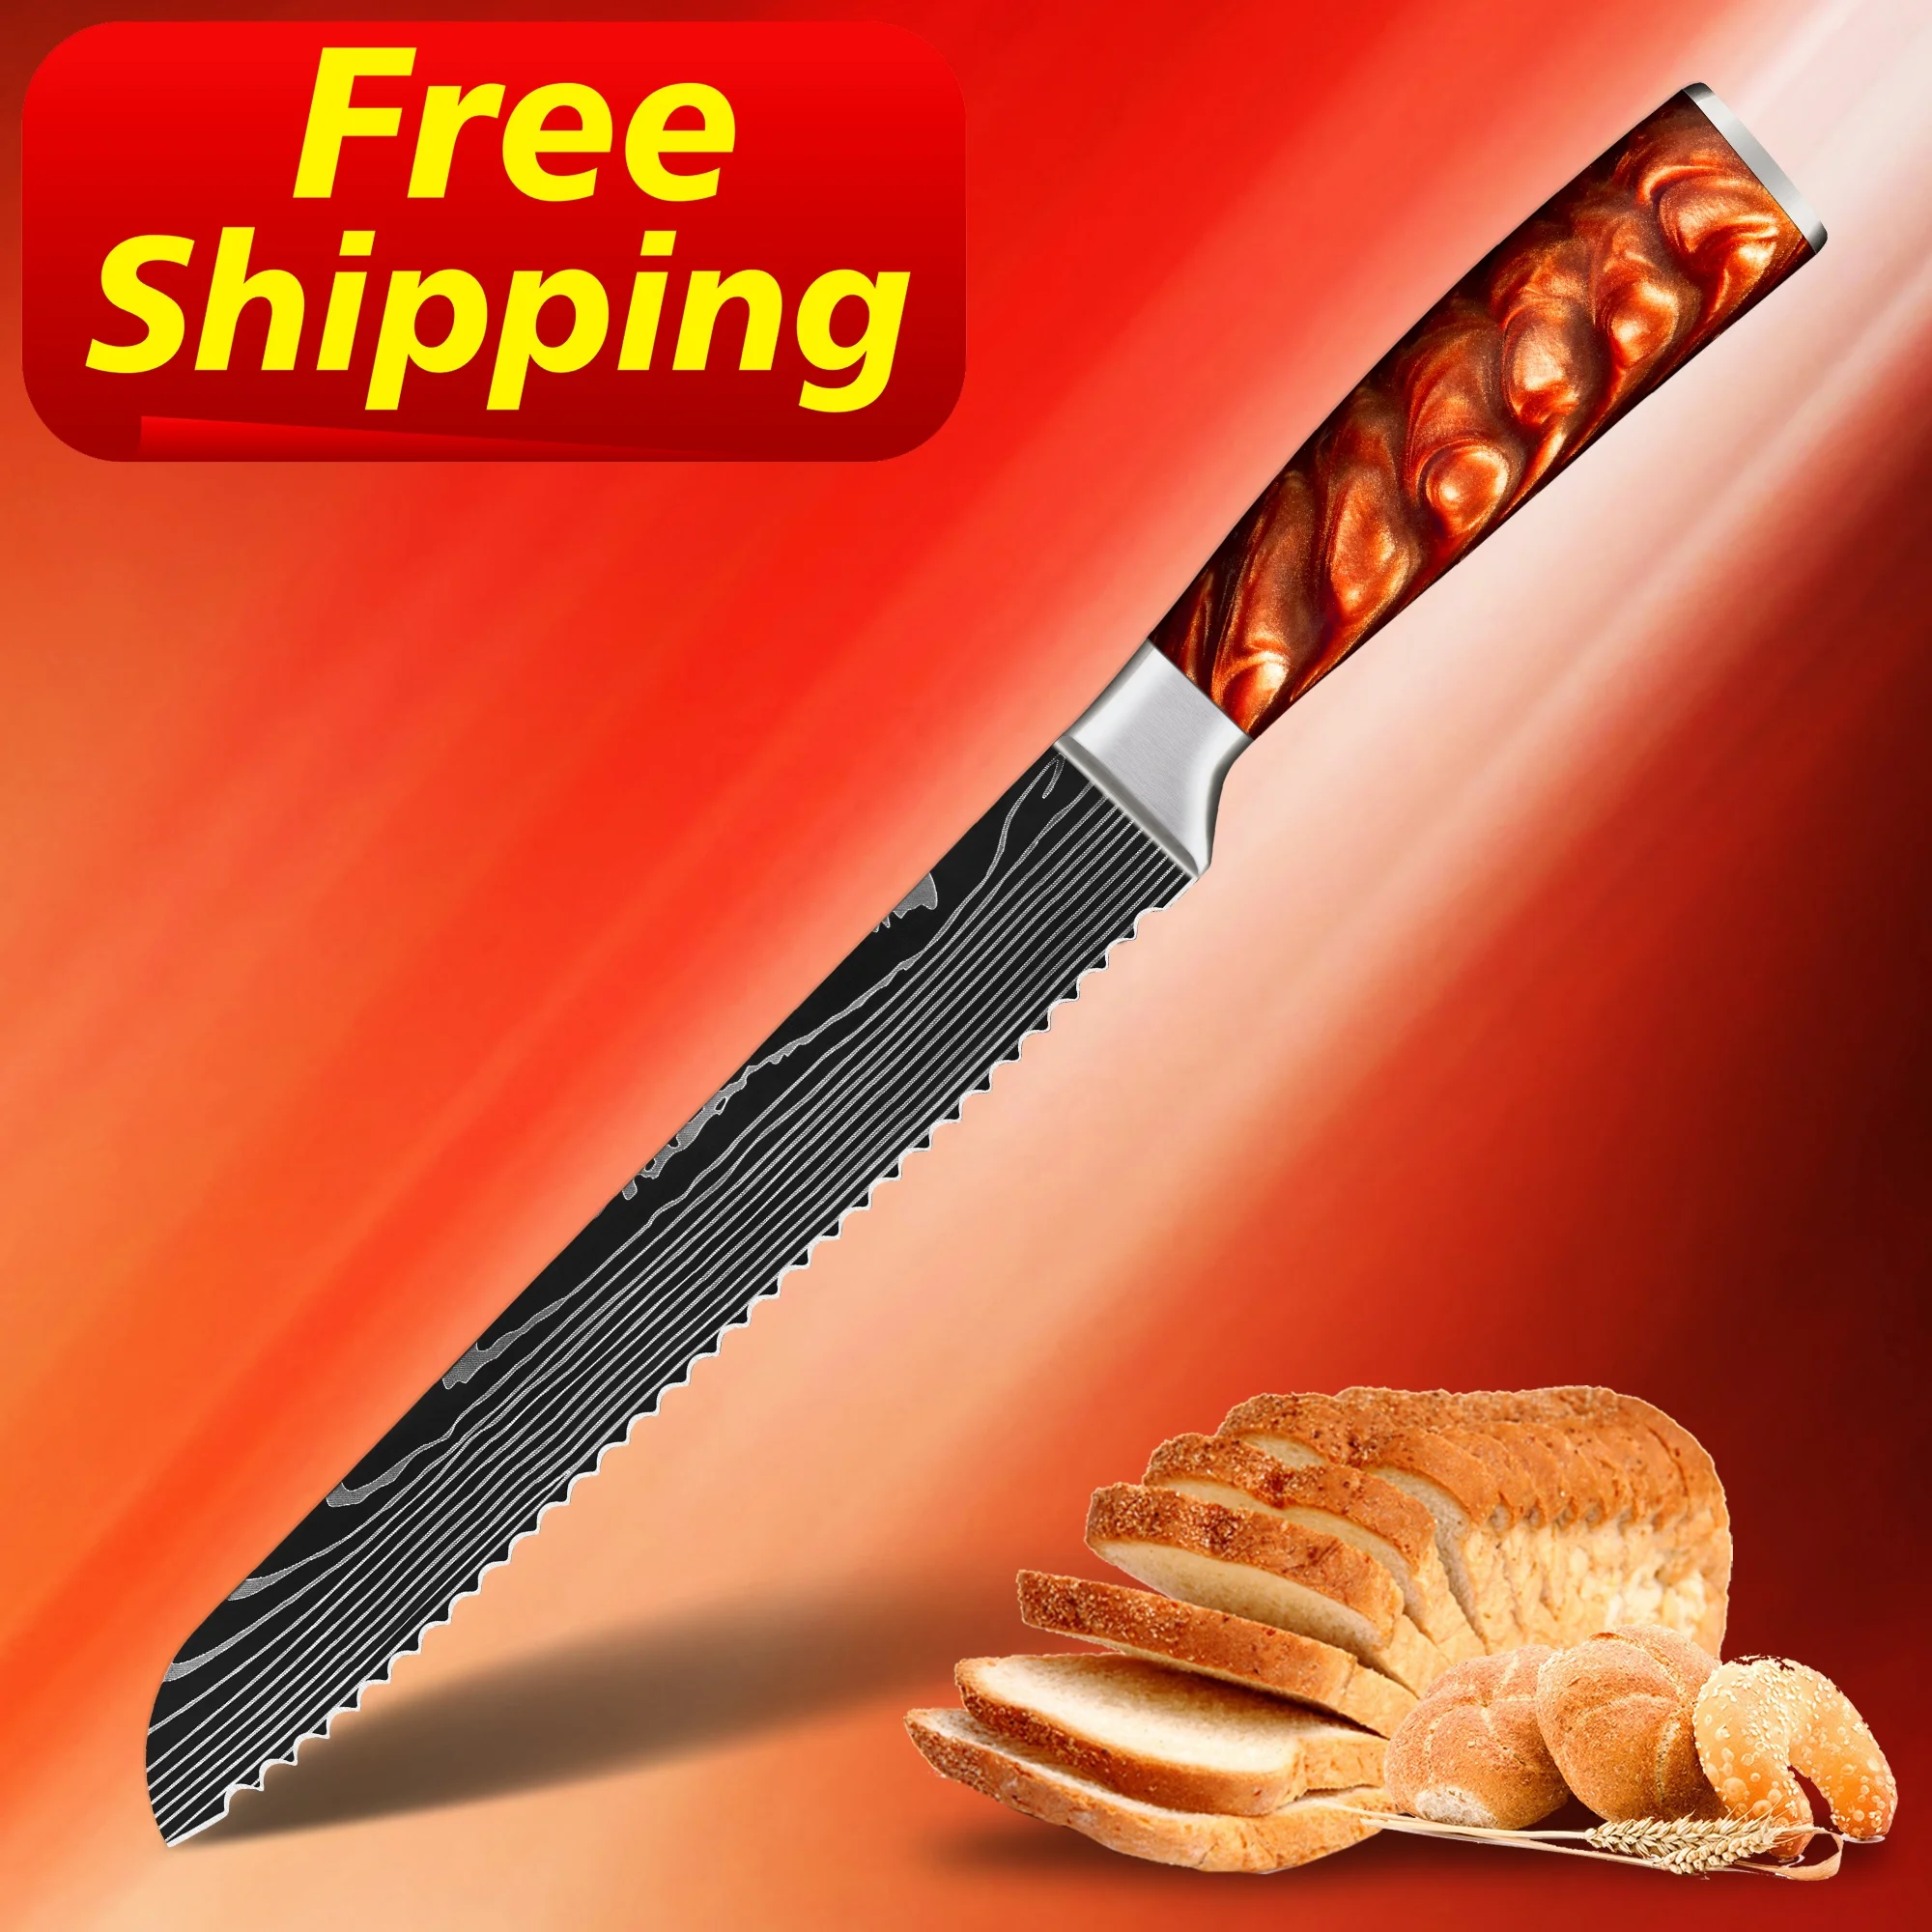 

Free Shipping Lava Red Resin 8 inch damascus bread knife stainless steel bread scoring knife bread scoring knife by skycook, Customized color